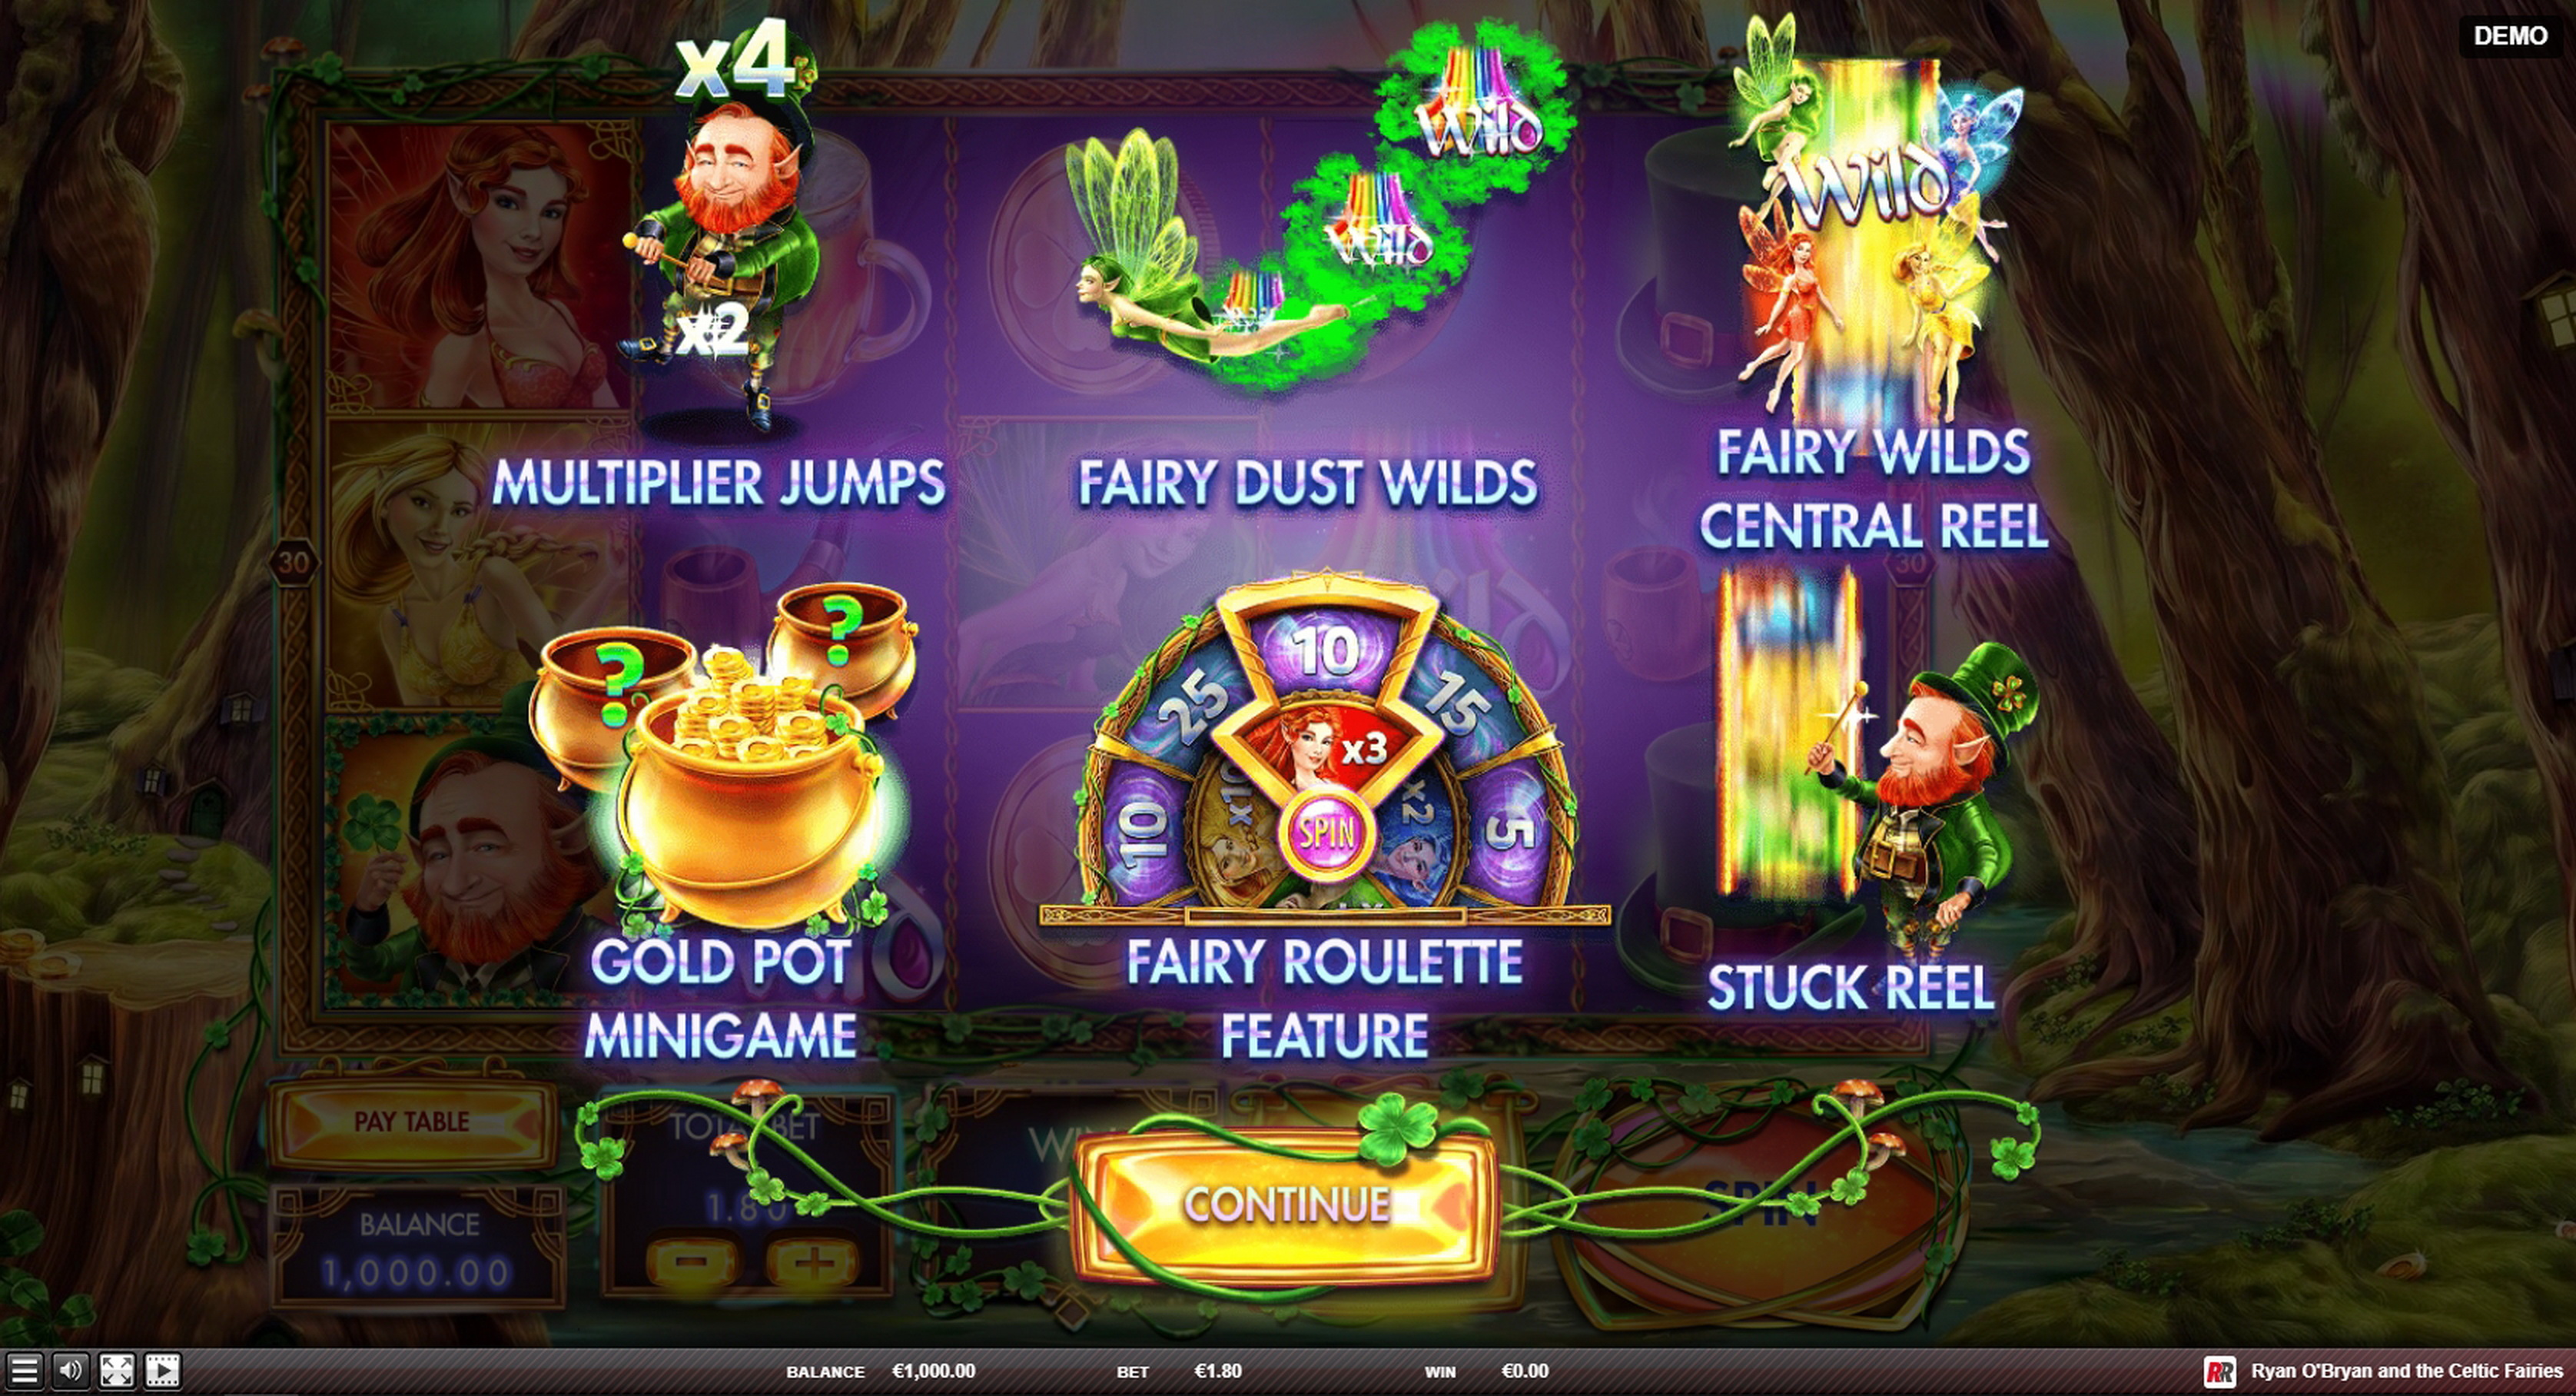 Play Ryan O'Bryan and the Celtic Fairies Free Casino Slot Game by Red Rake Gaming